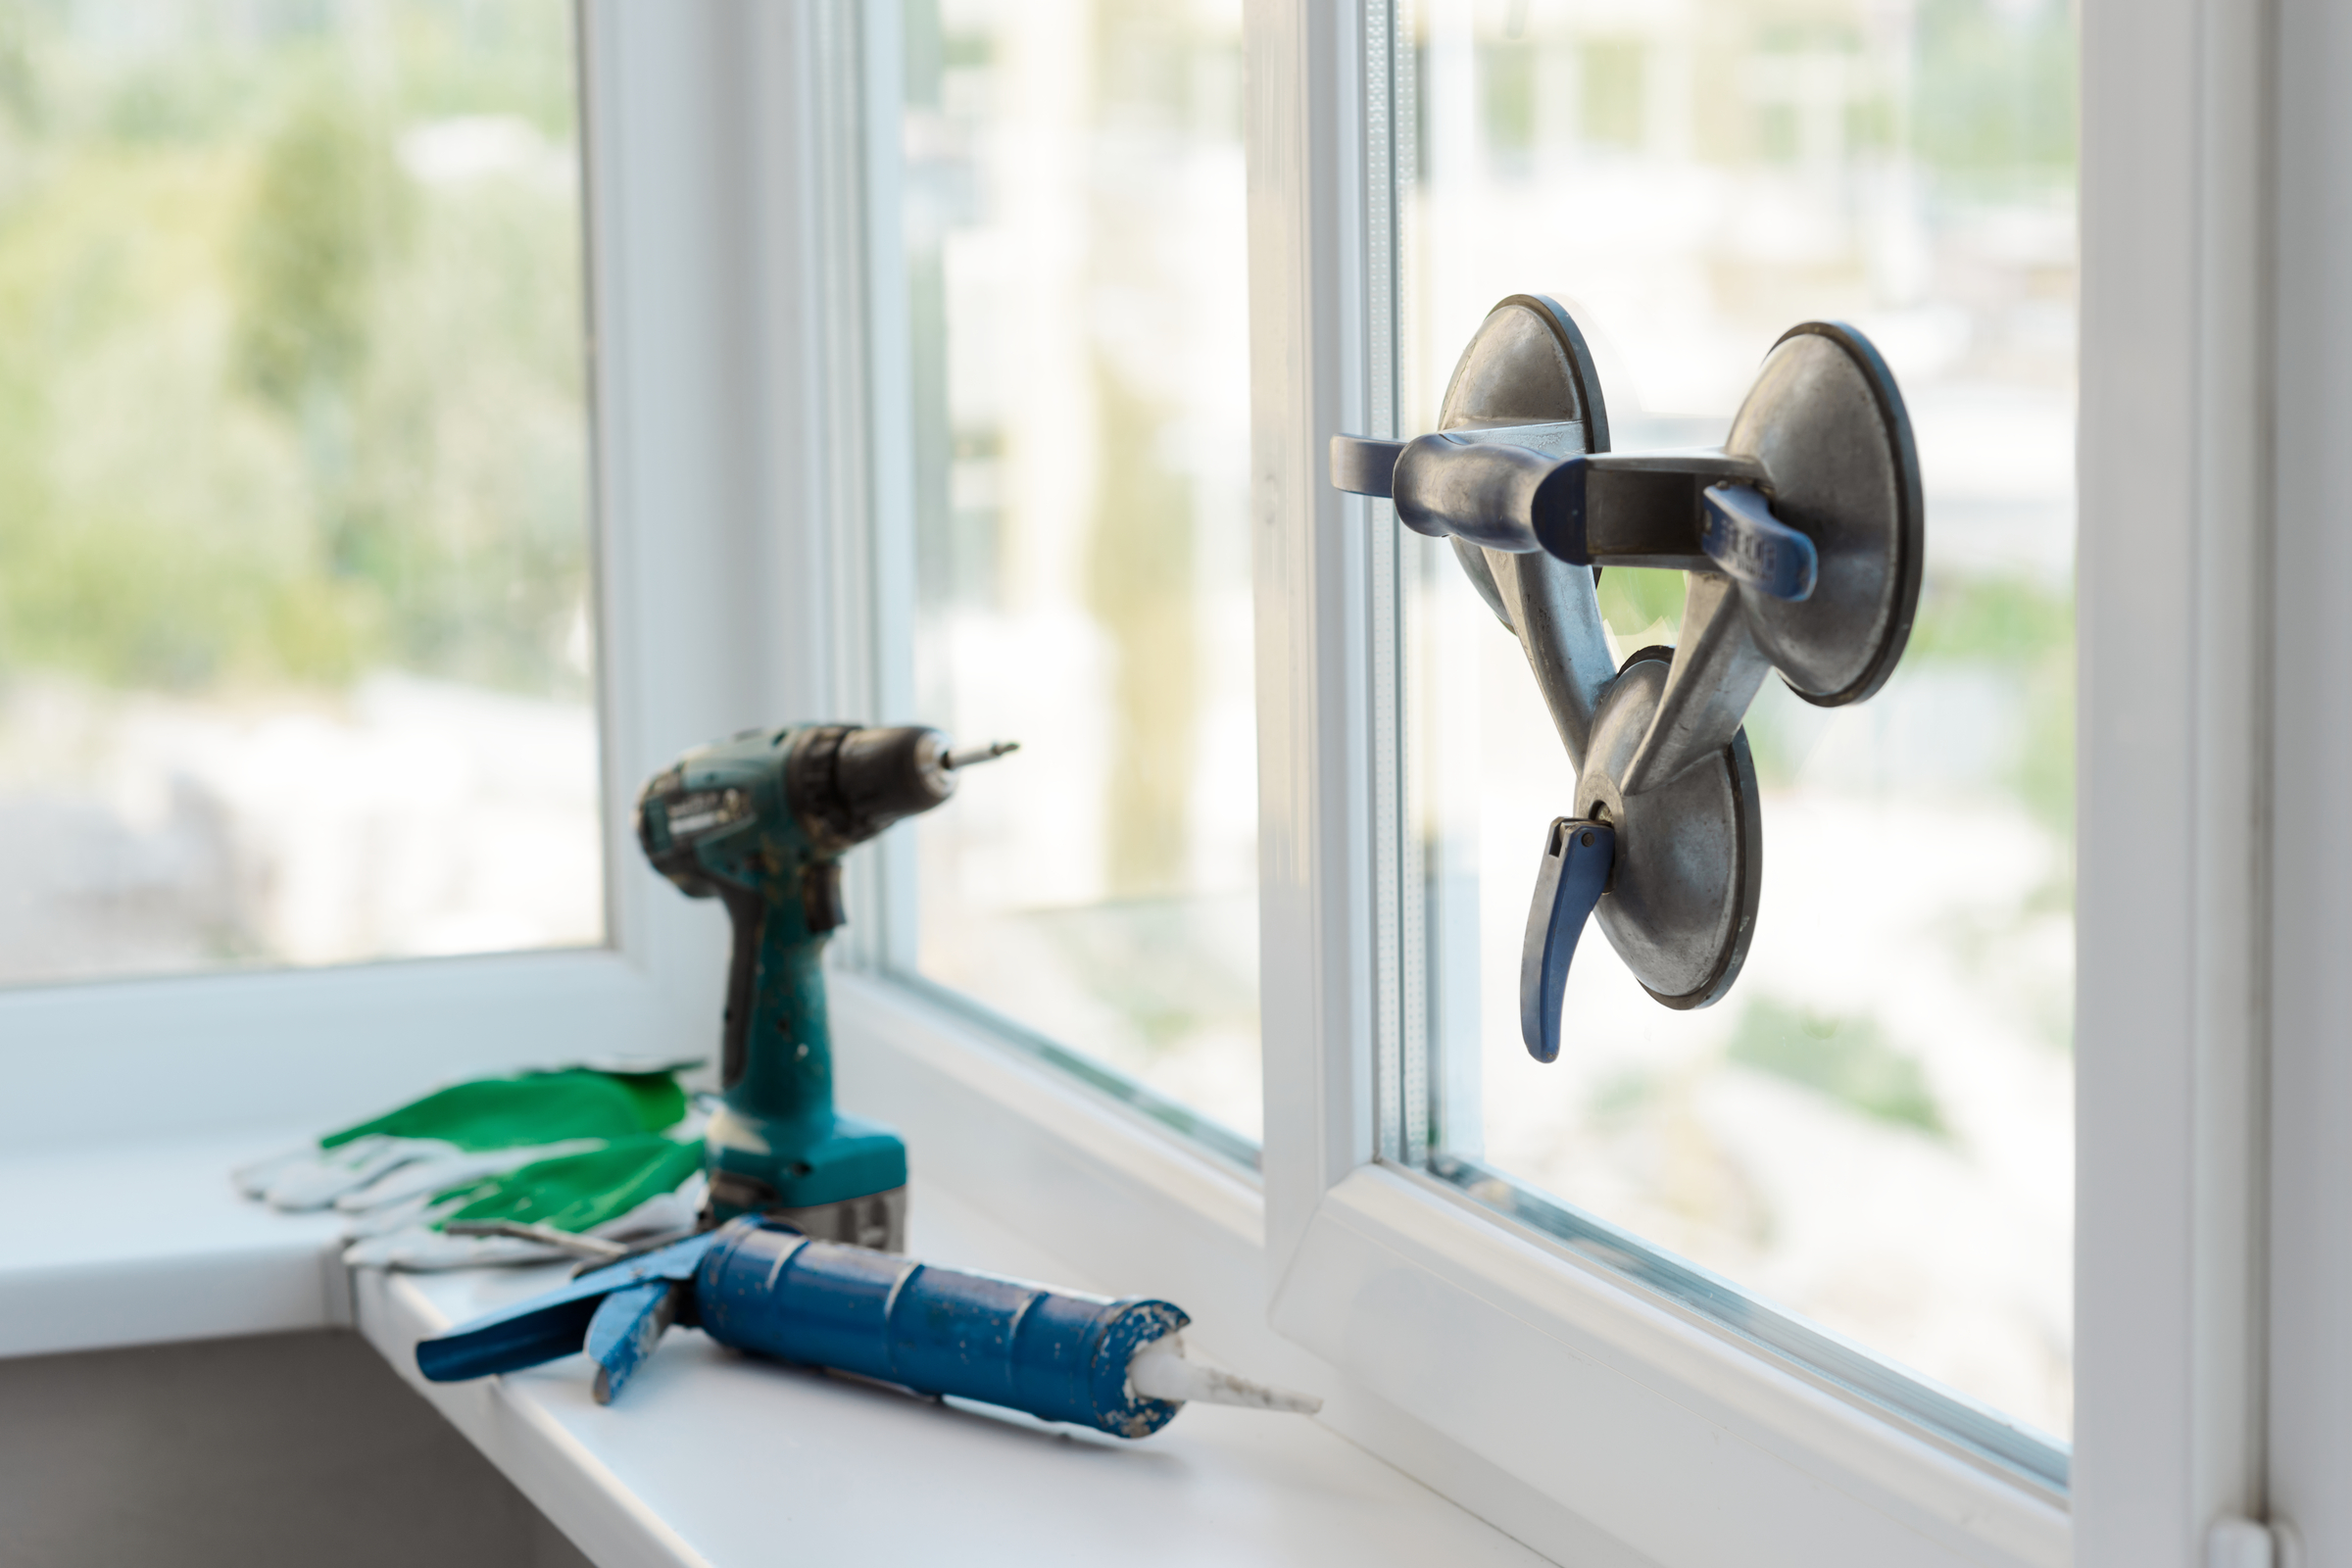 Why Should You Use An Expert Glazier To Install Glass?